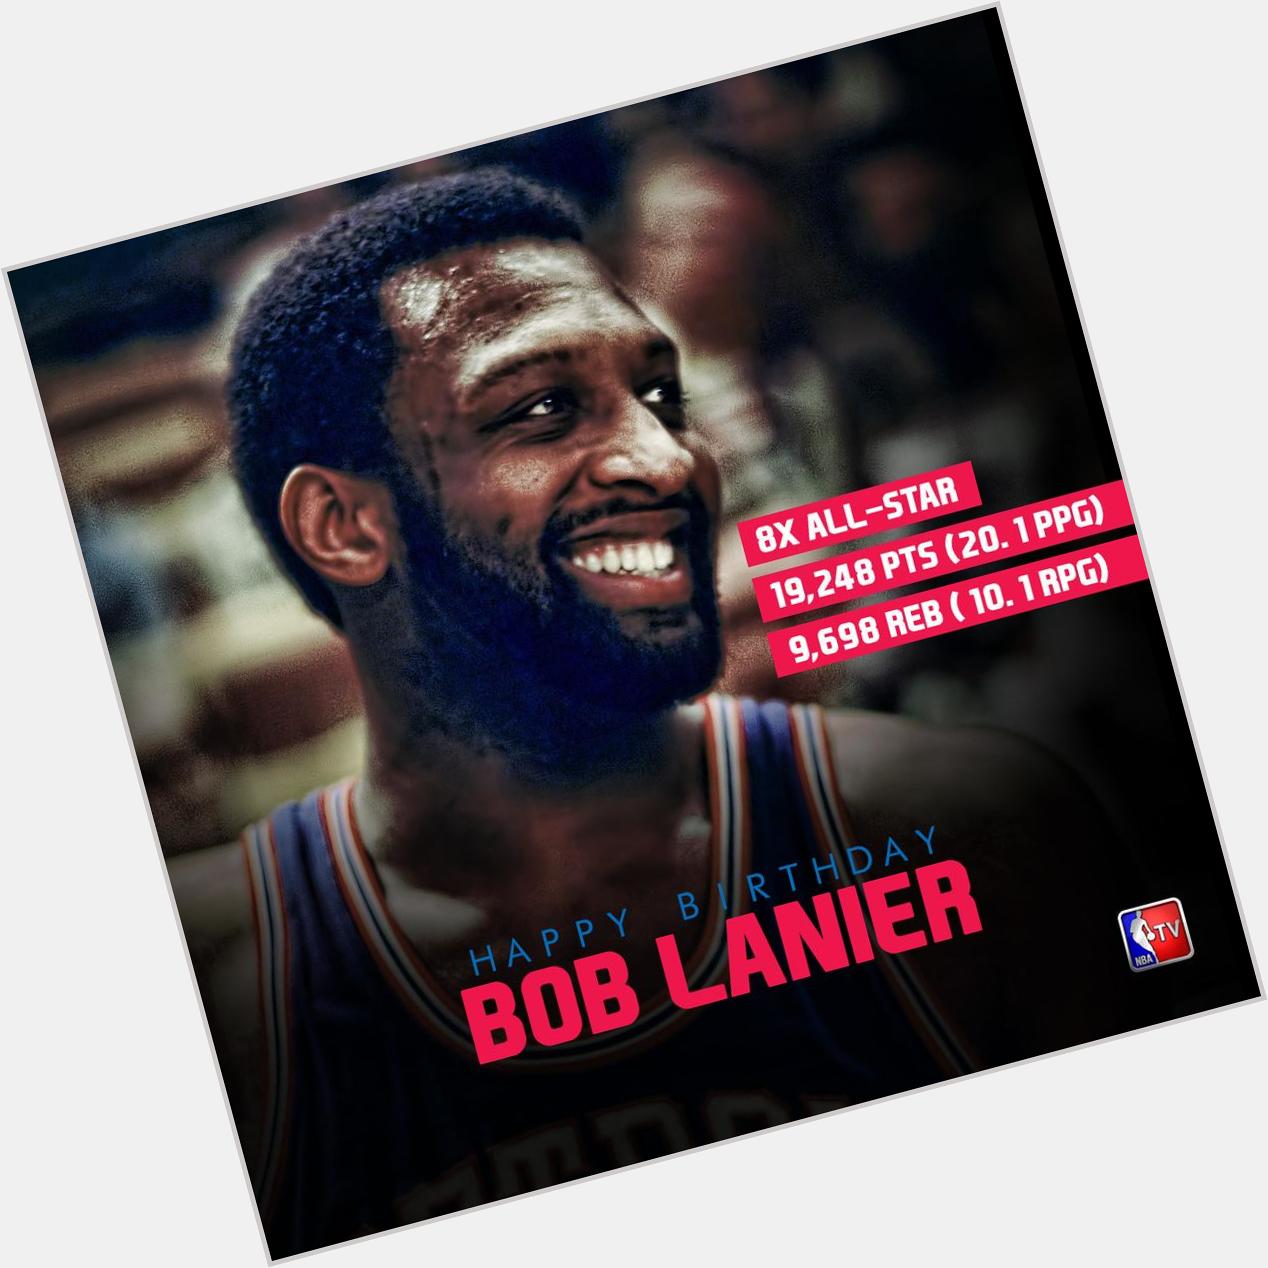  : Happy Birthday to another legend, Bob Lanier! The 1970 No. 1 pick turns 67 